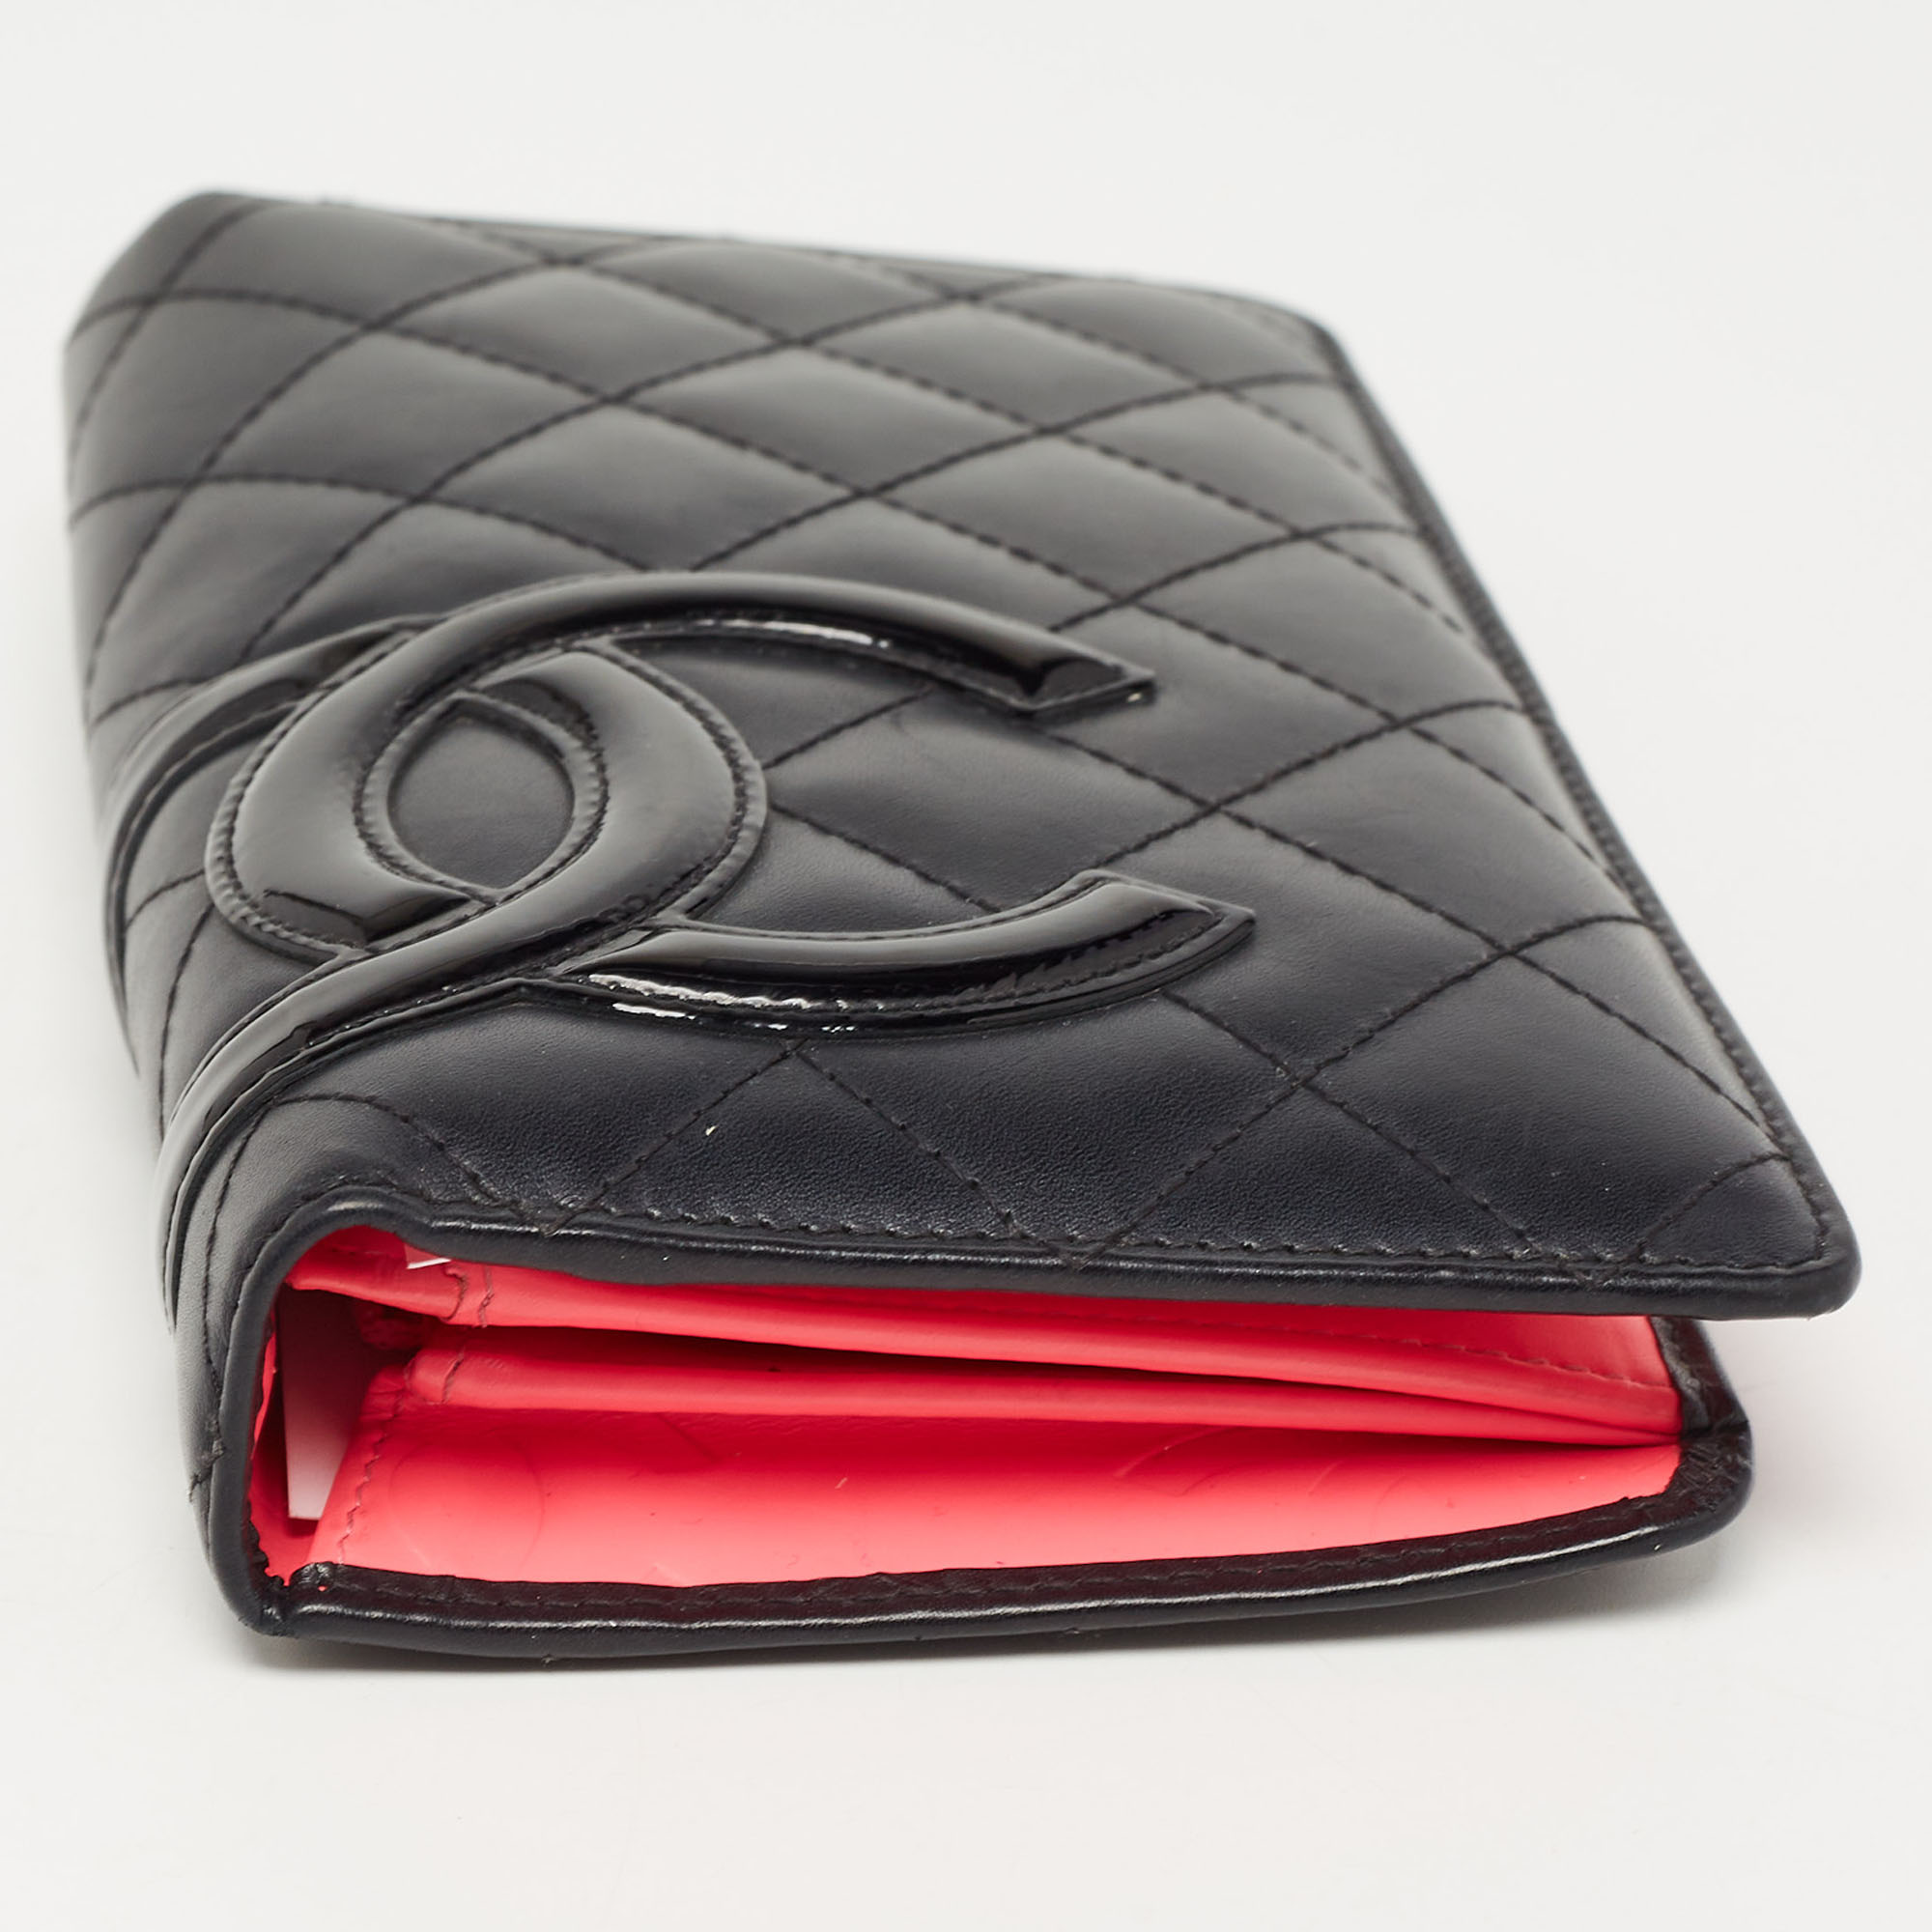 Chanel Black Quilted Leather Cambon Ligne Long Wallet